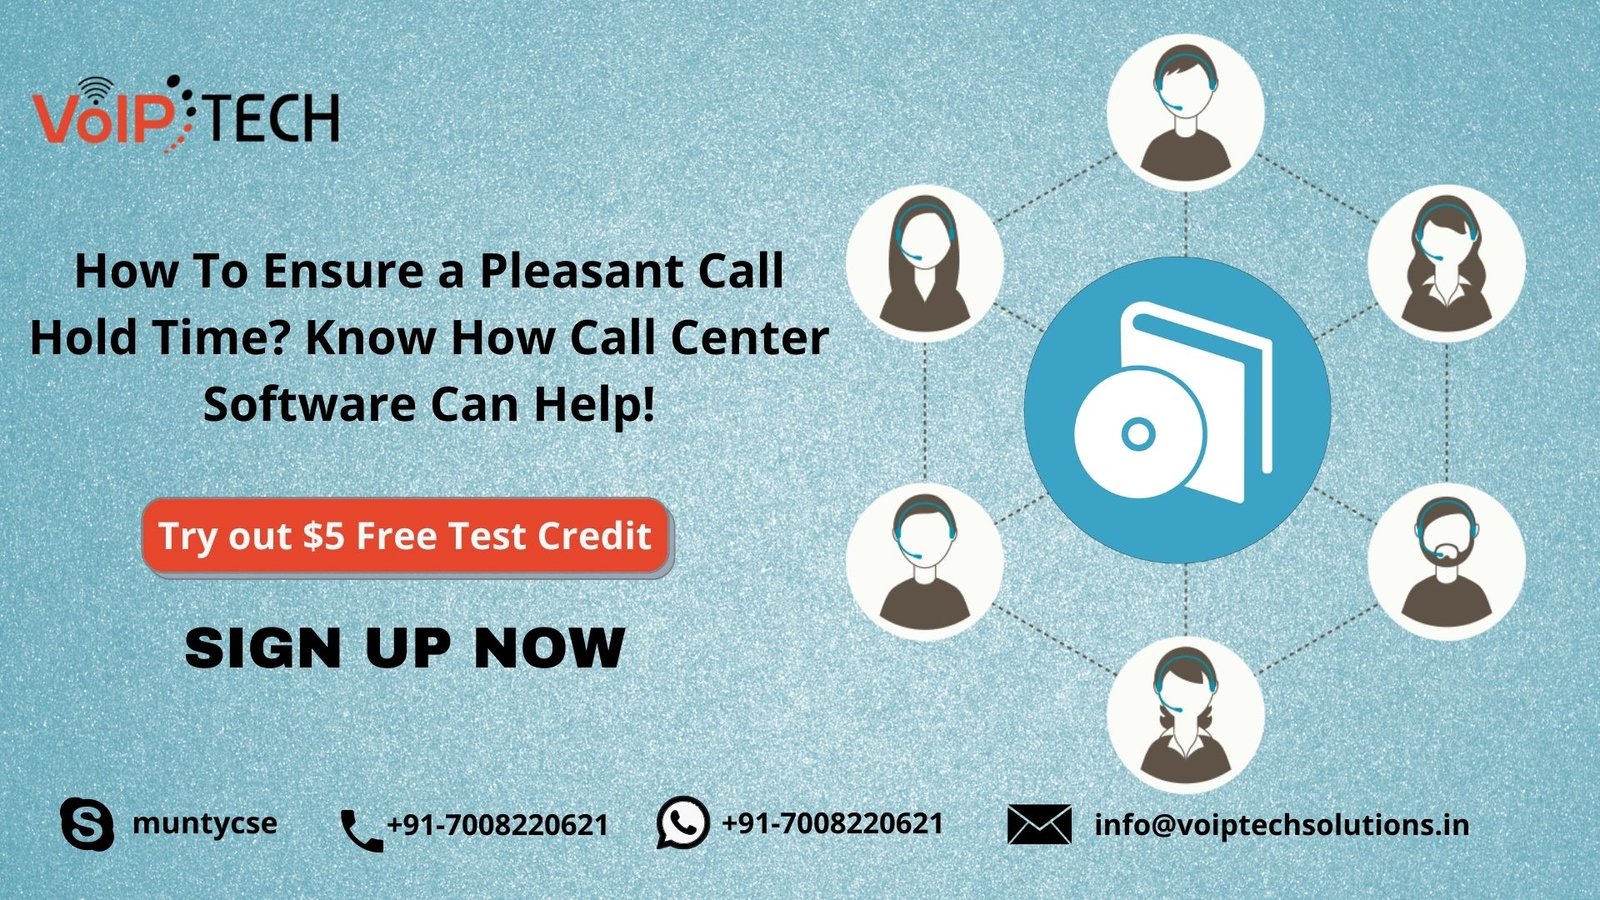 phone communication, Call Hold, VoIP tech solutions, vici dialer, virtual number, Voip Providers, voip services in india, best sip provider, business voip providers, VoIP Phone Numbers, voip minutes provider, top voip providers, voip minutes, International VoIP Provider